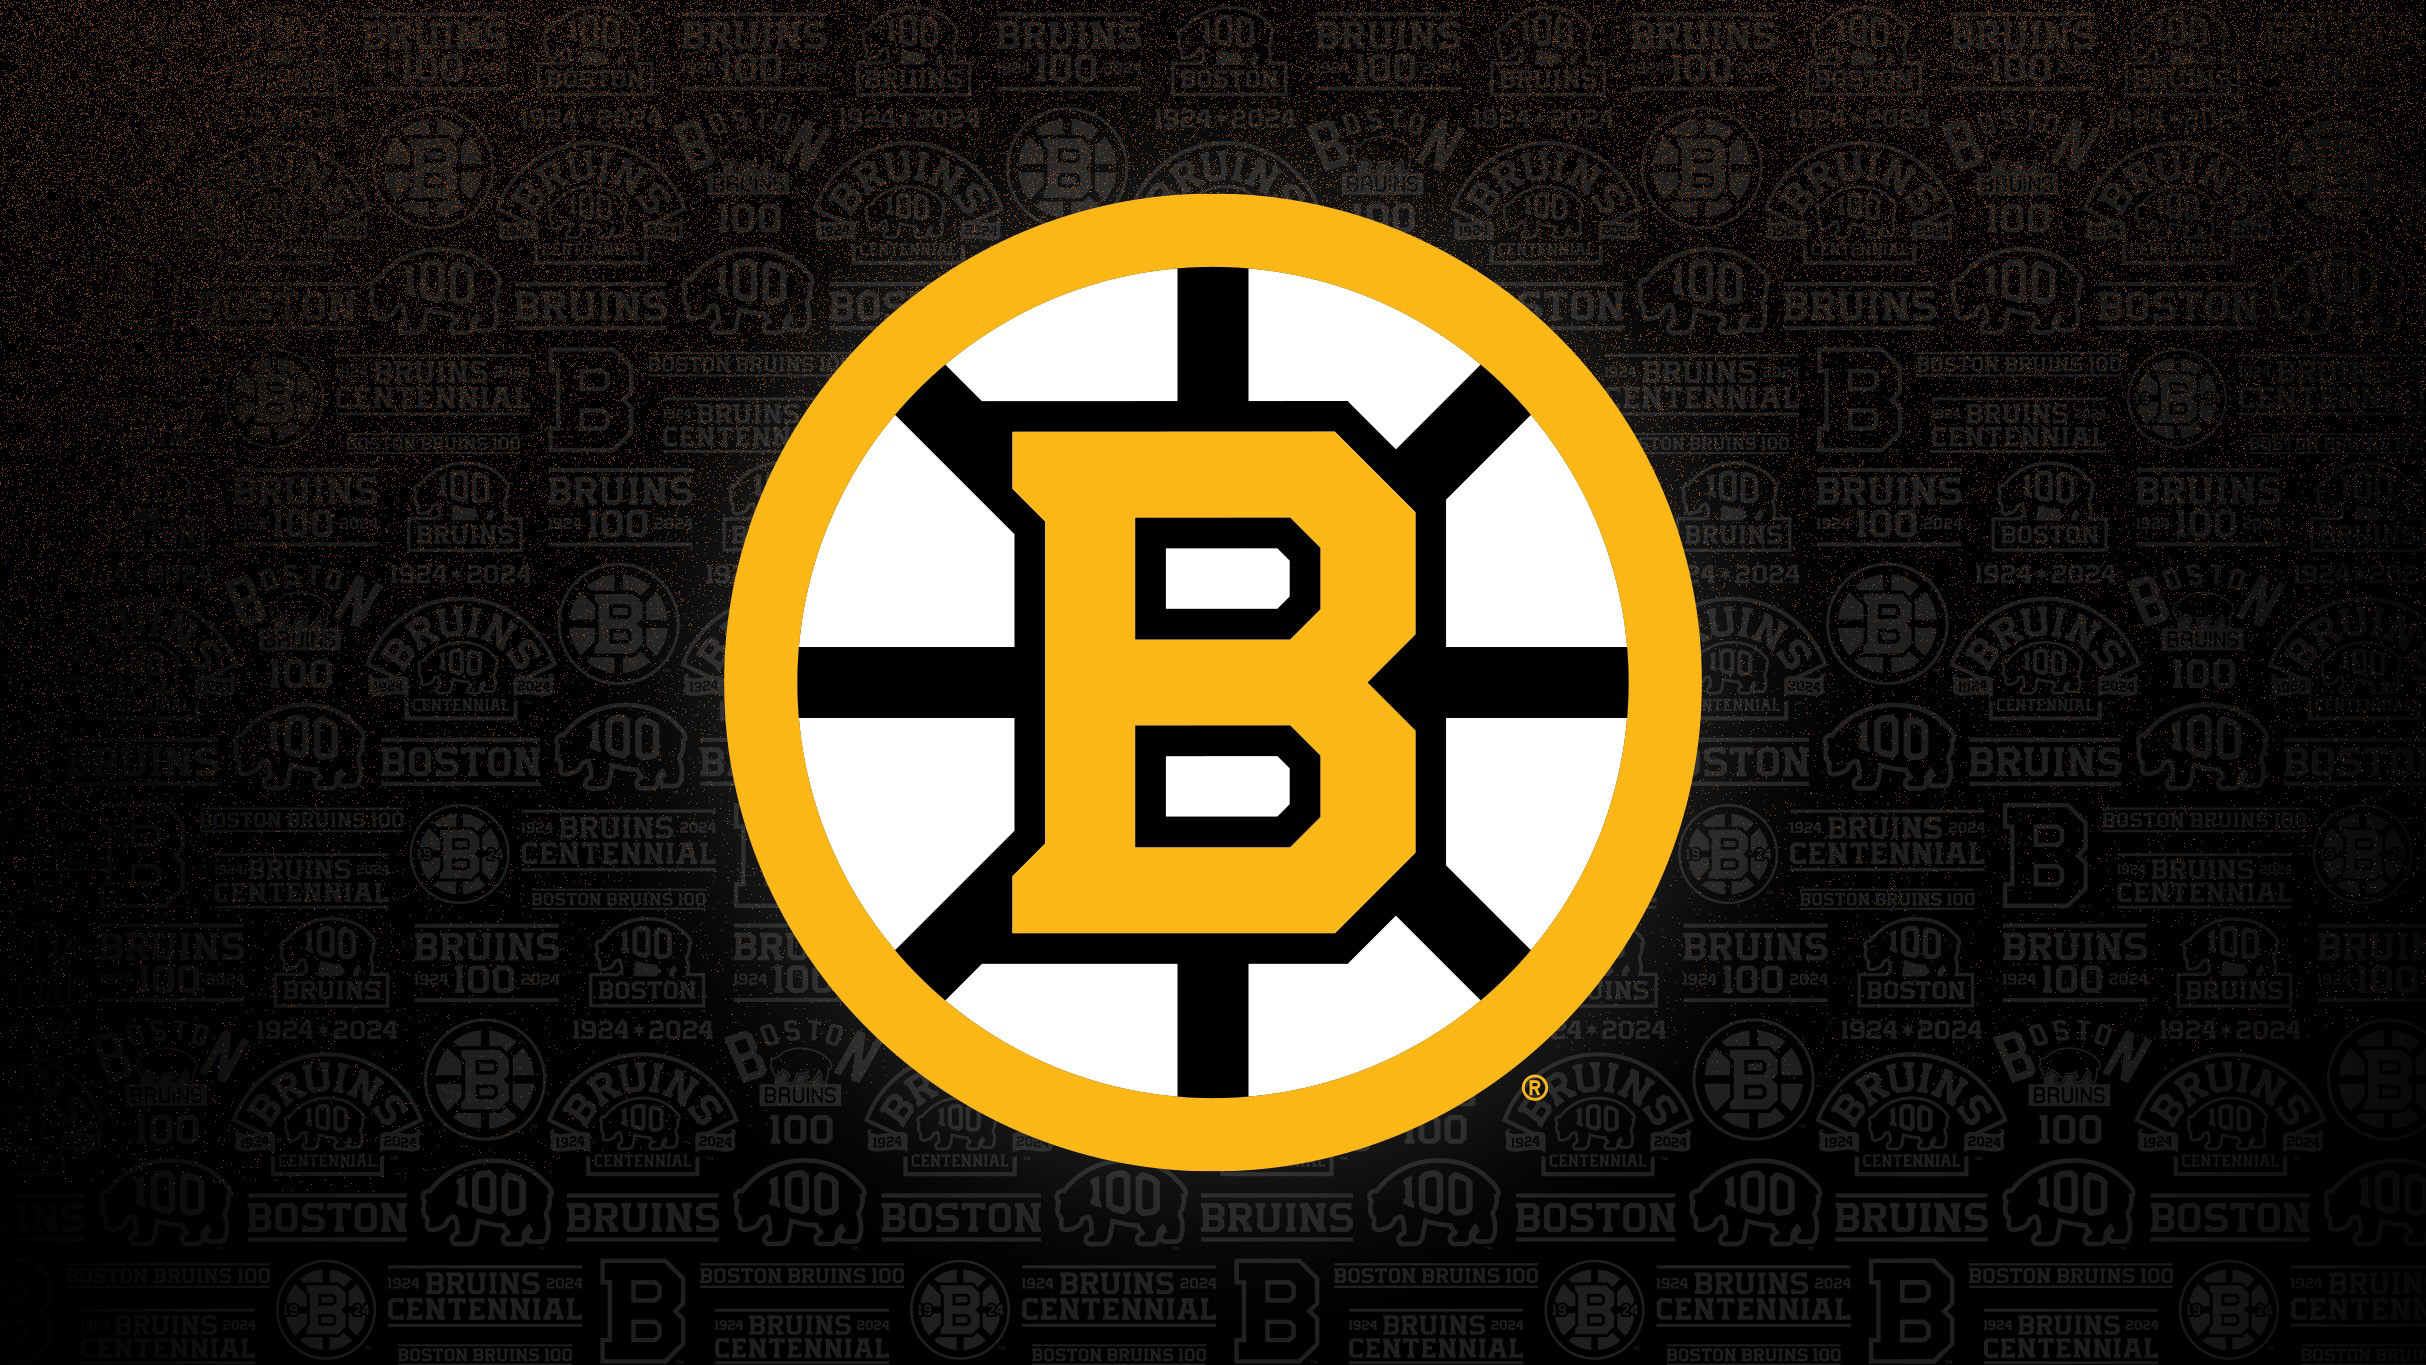 Second Round: Panthers at Bruins Rd 2 Hm Gm 3